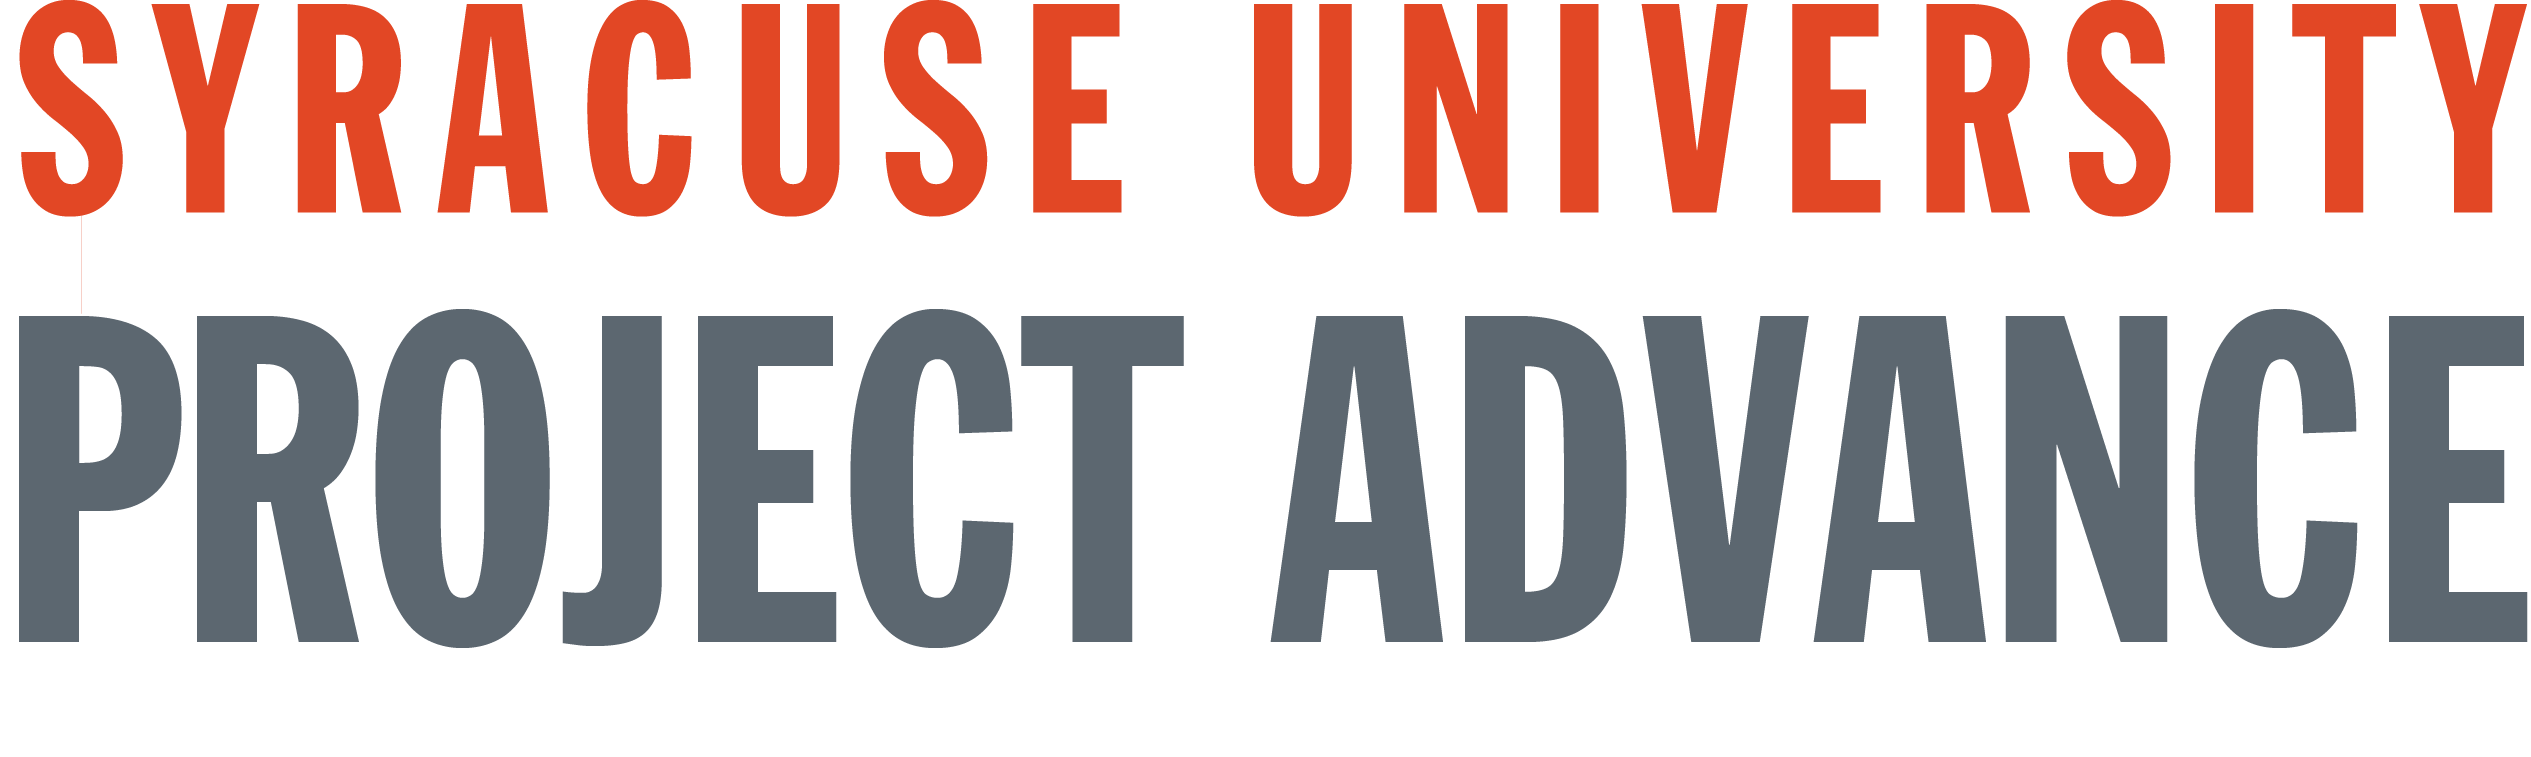 Syracuse University Project Advanced logo with those words written